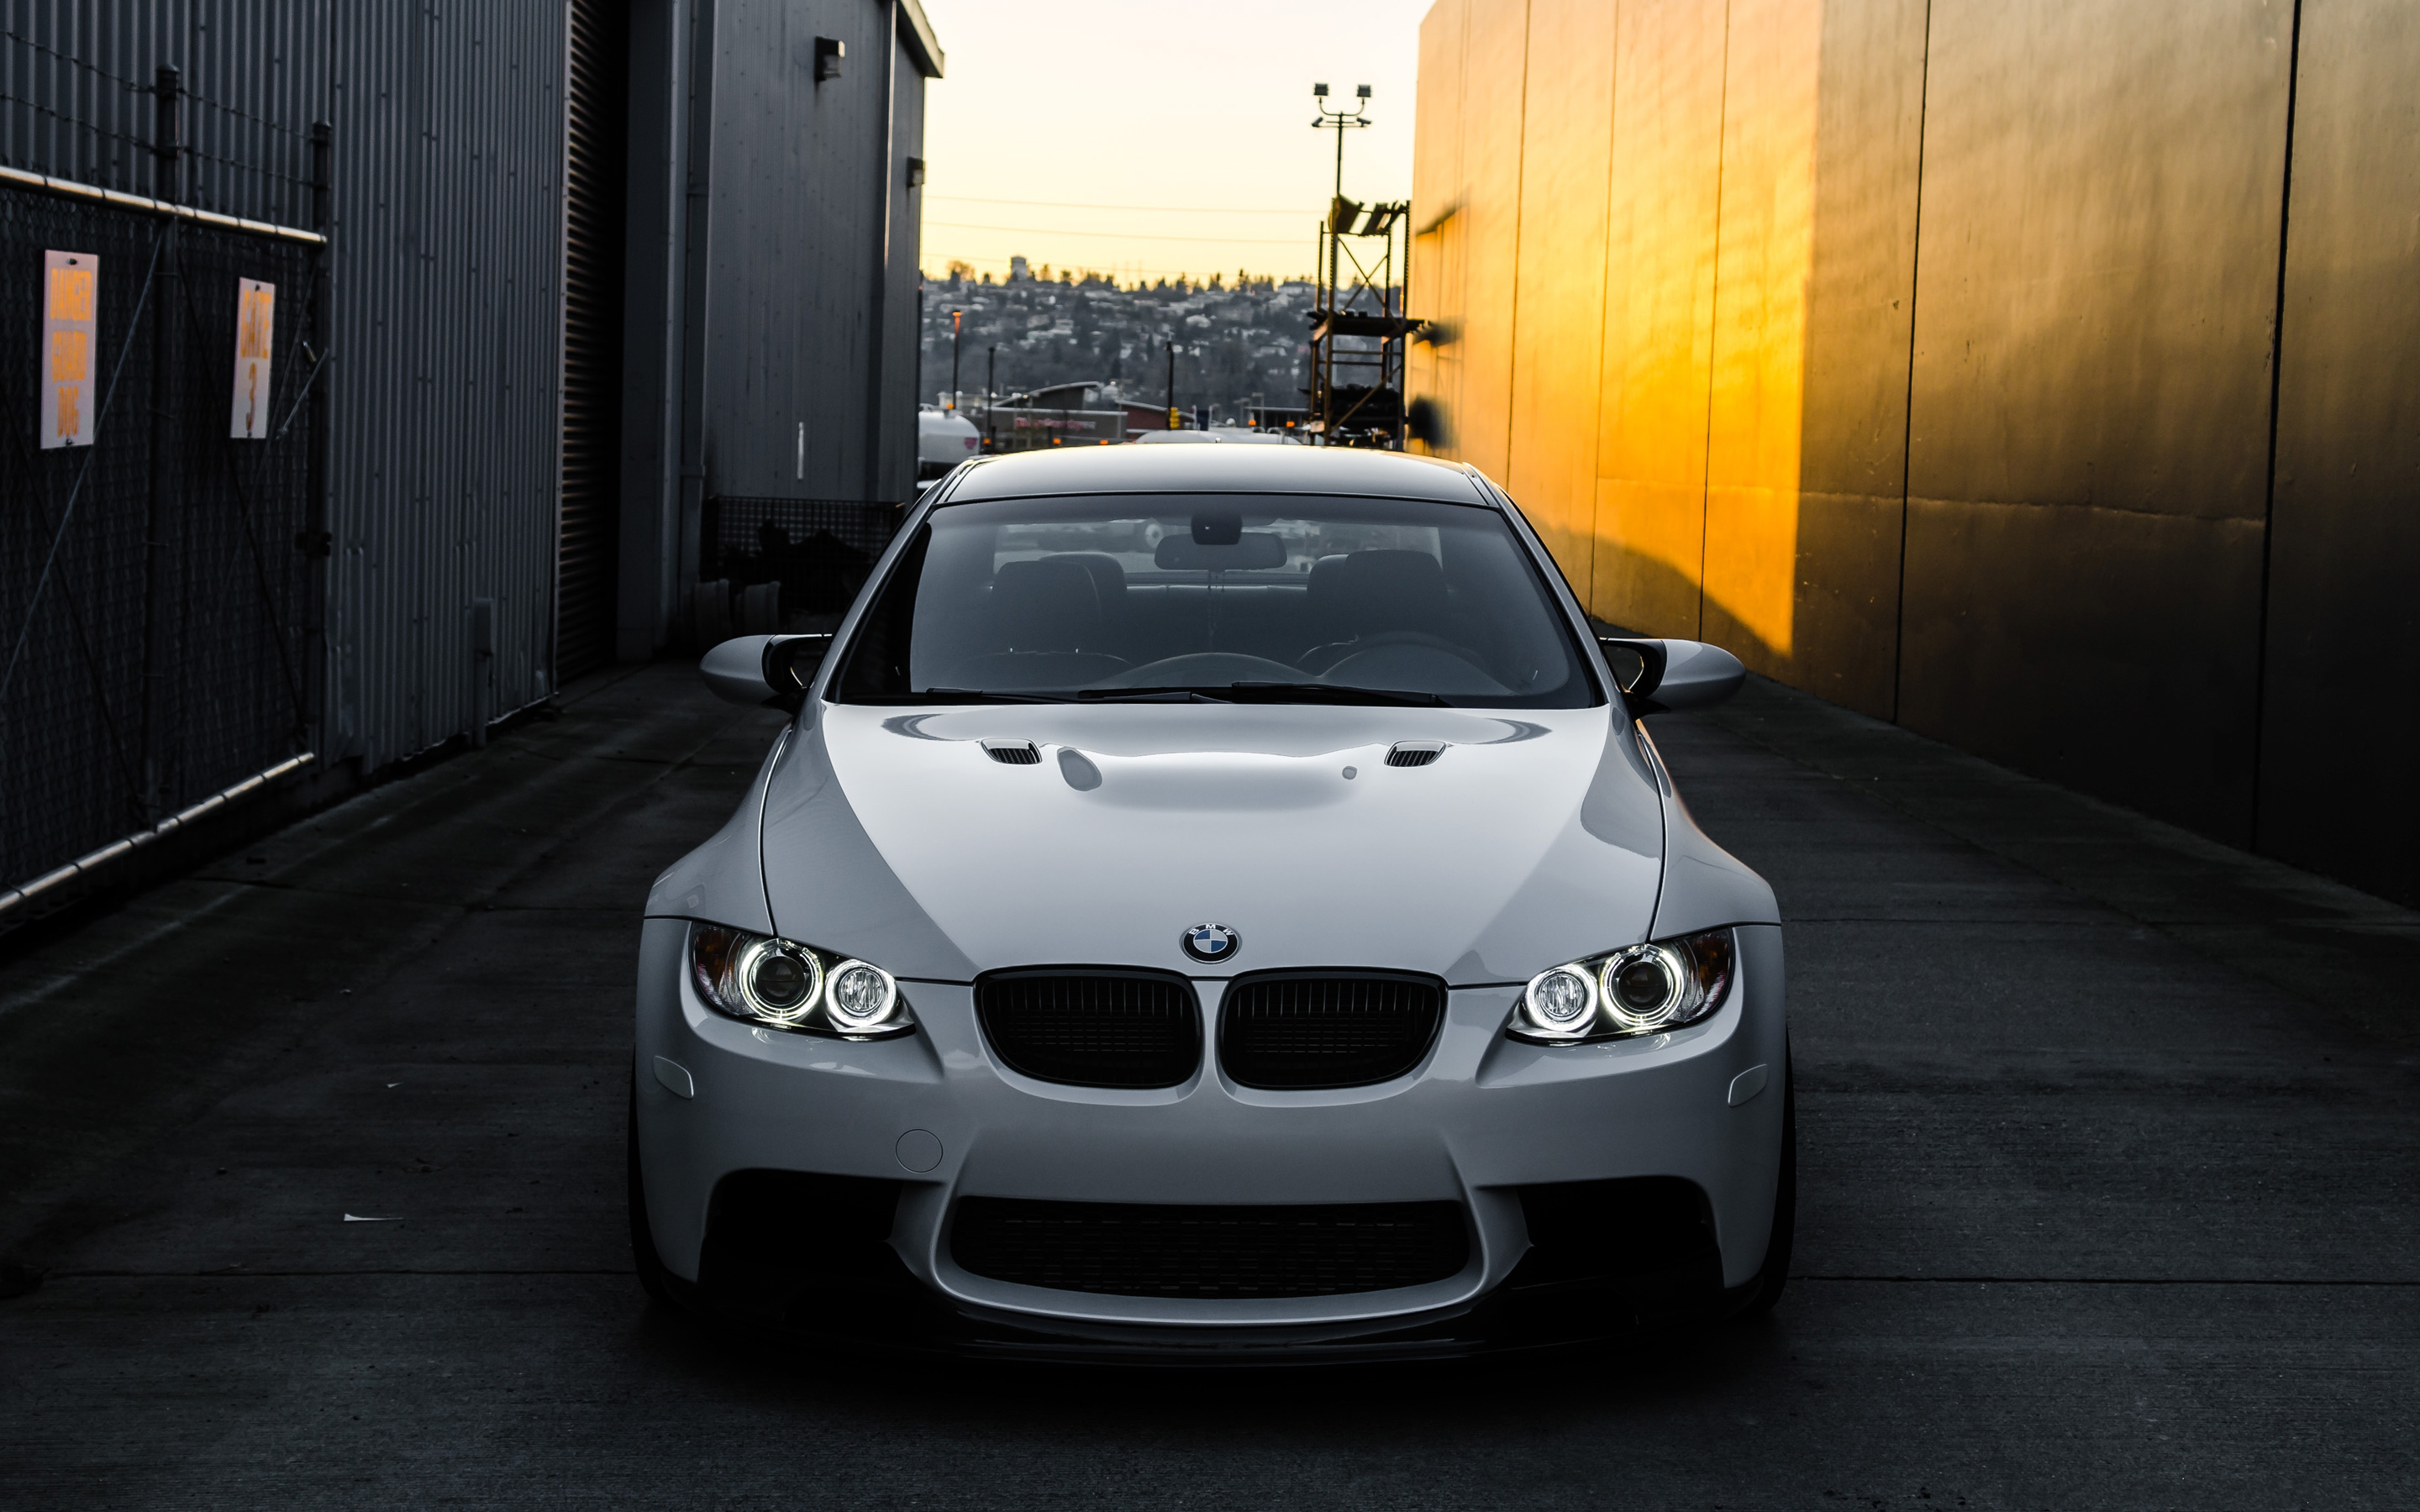 Image HD Bmw M3 Wallpaper Pc Android iPhone And iPad